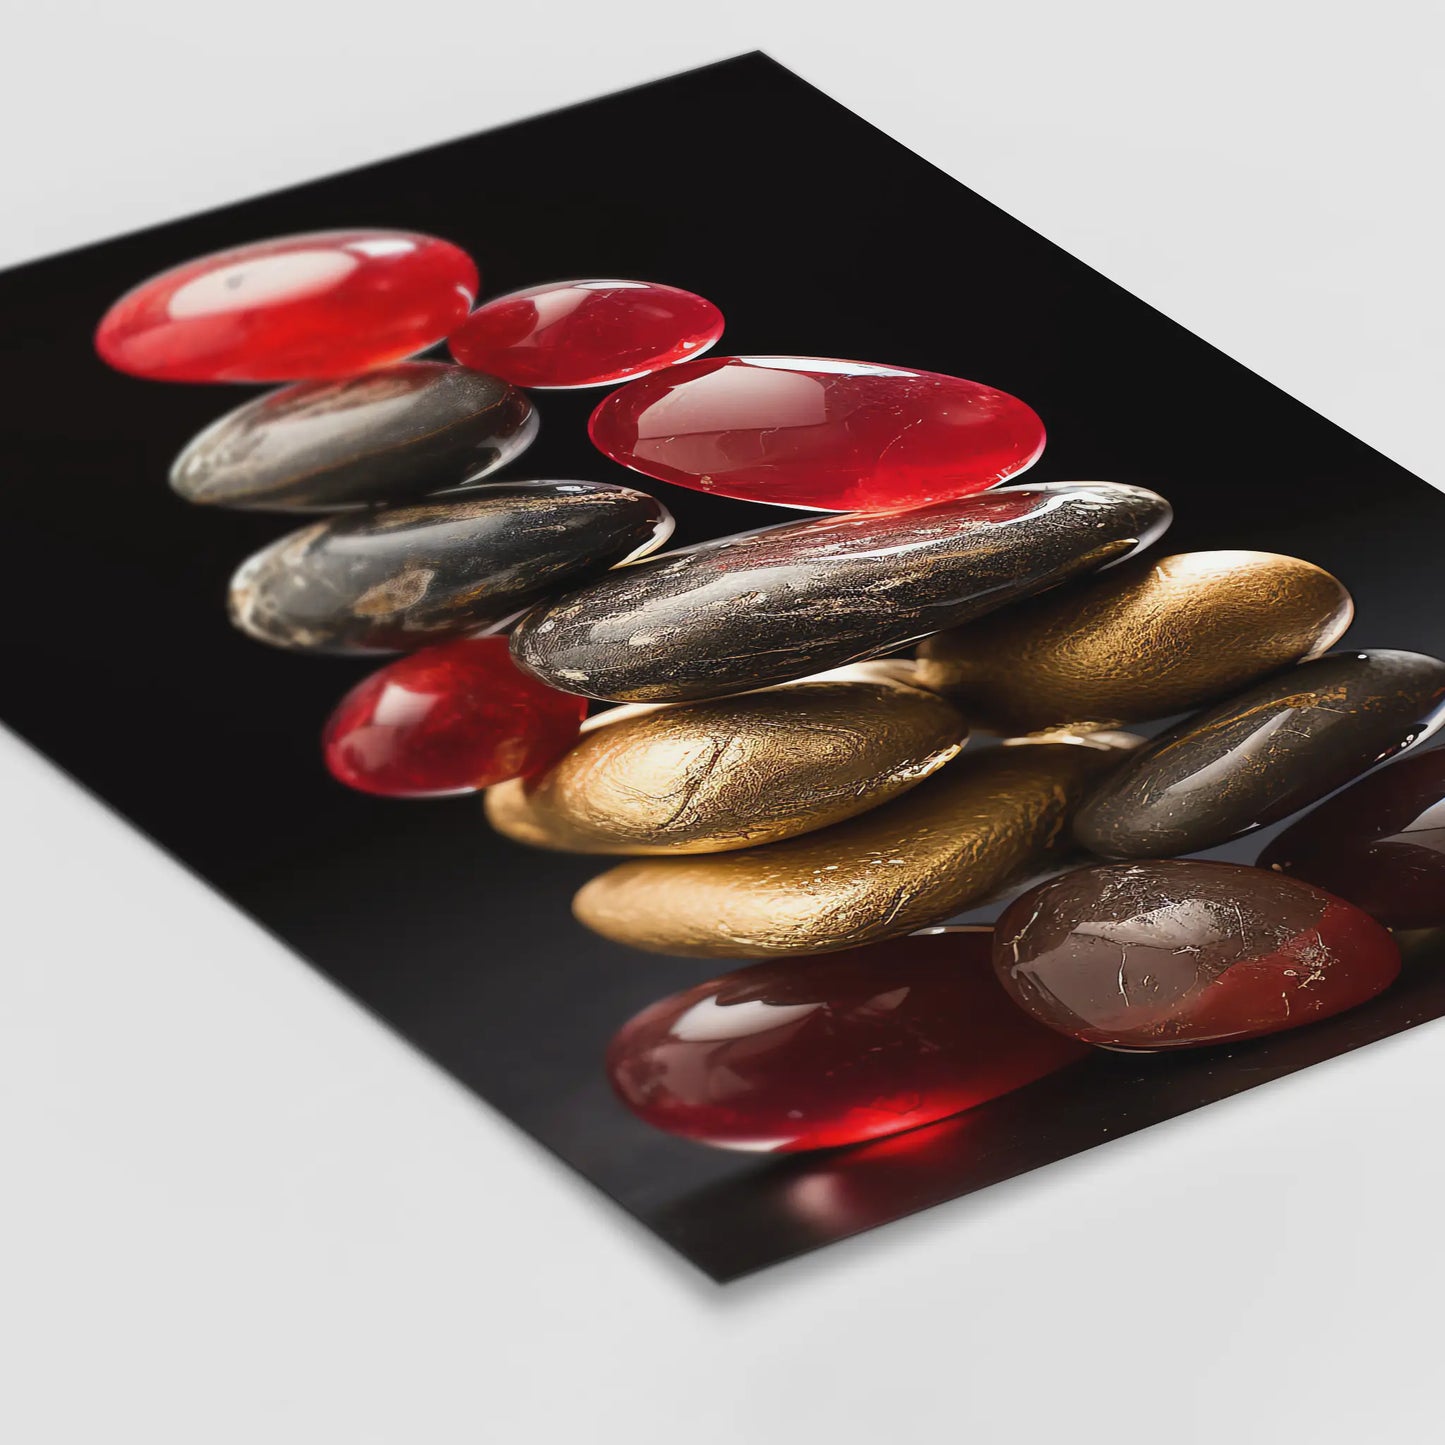 Red Zen Stones No 1 - Abstract Art - Perfectly Stacked Stones - Poster